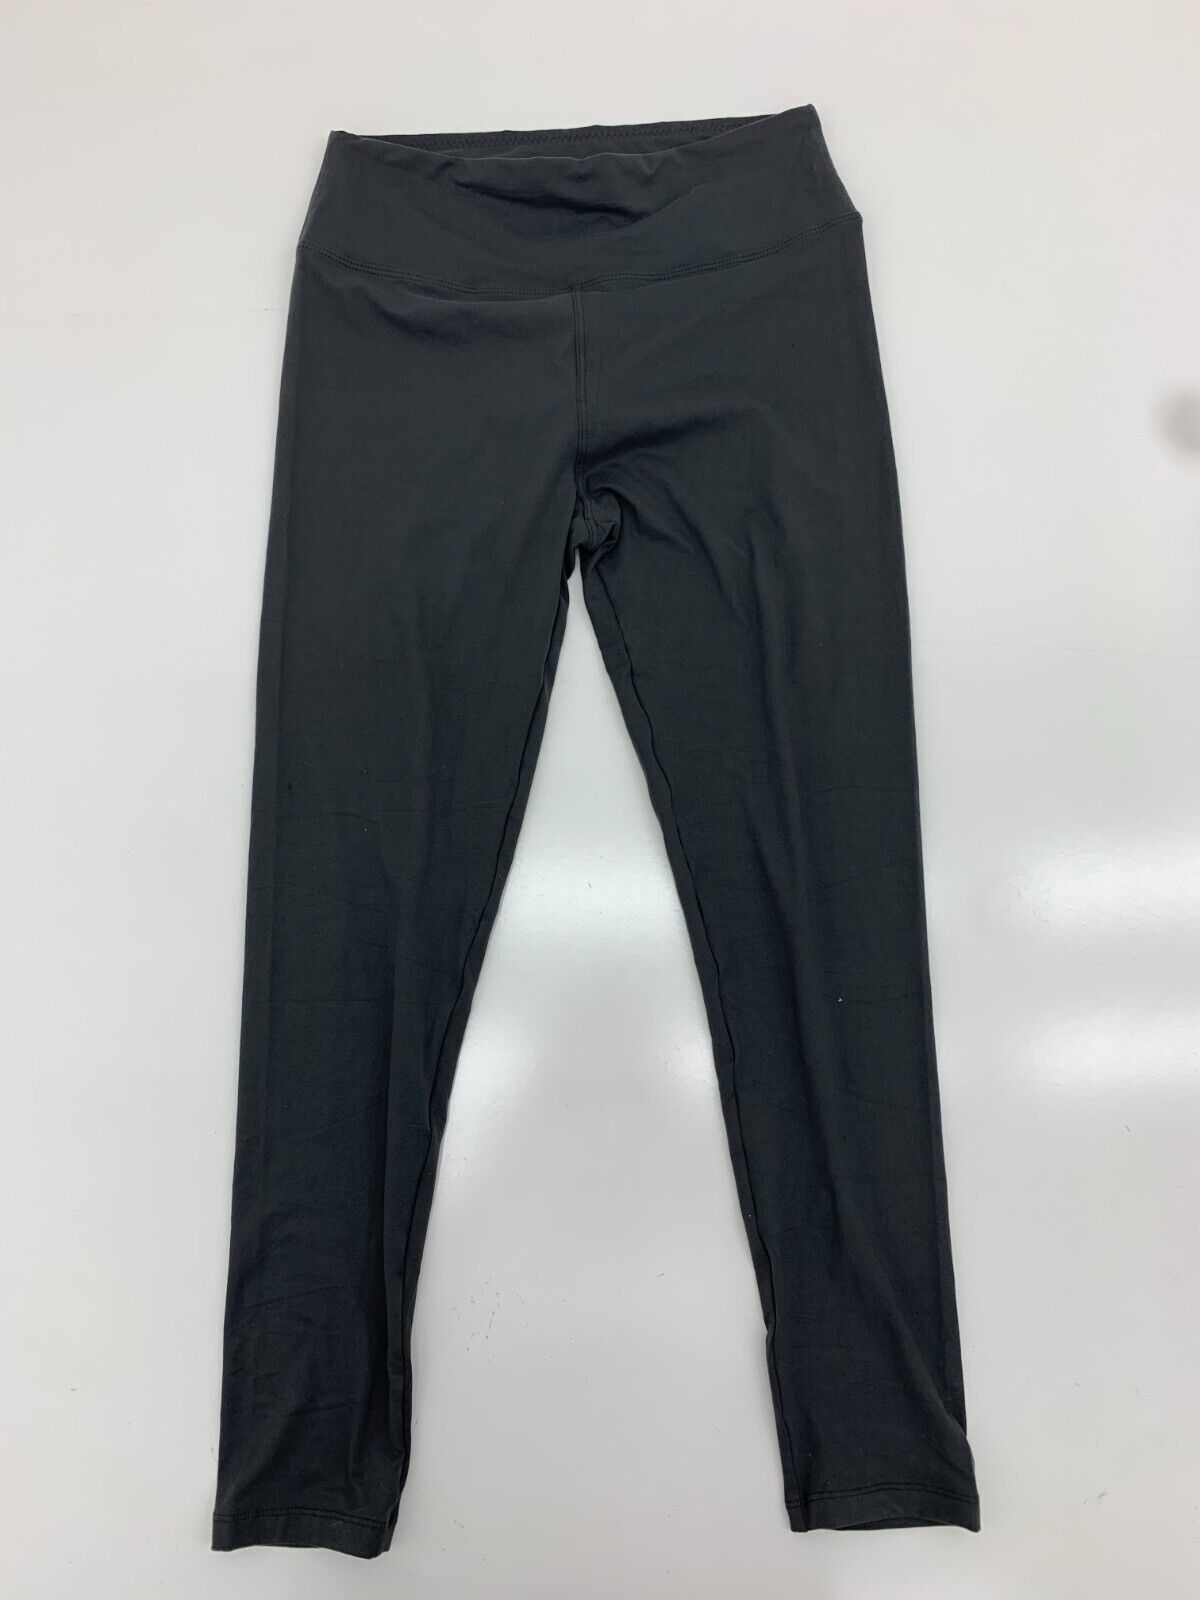 Womens Gray Compression Leggings Size Large - beyond exchange